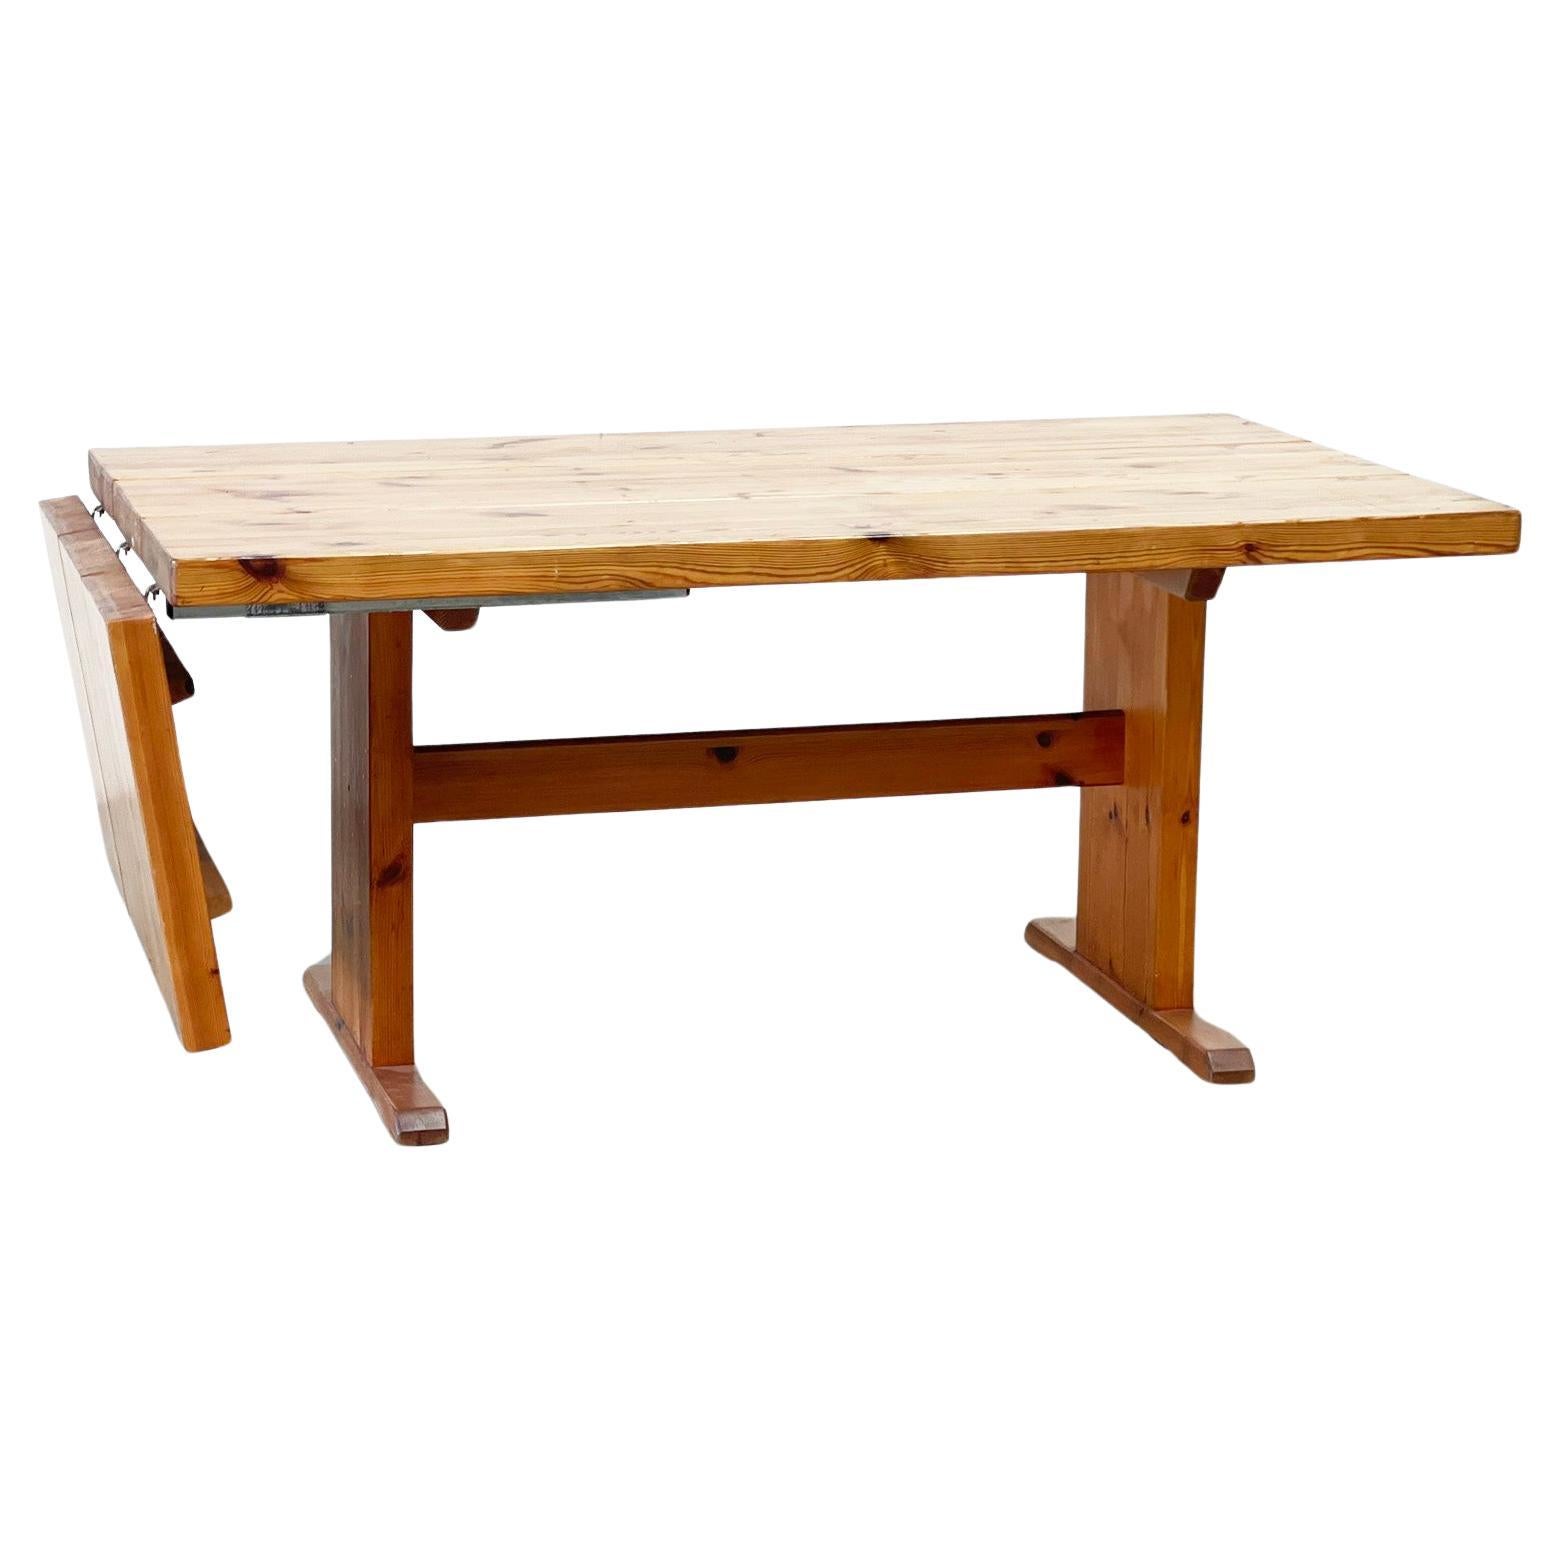 1980's pine extendable dining table For Sale